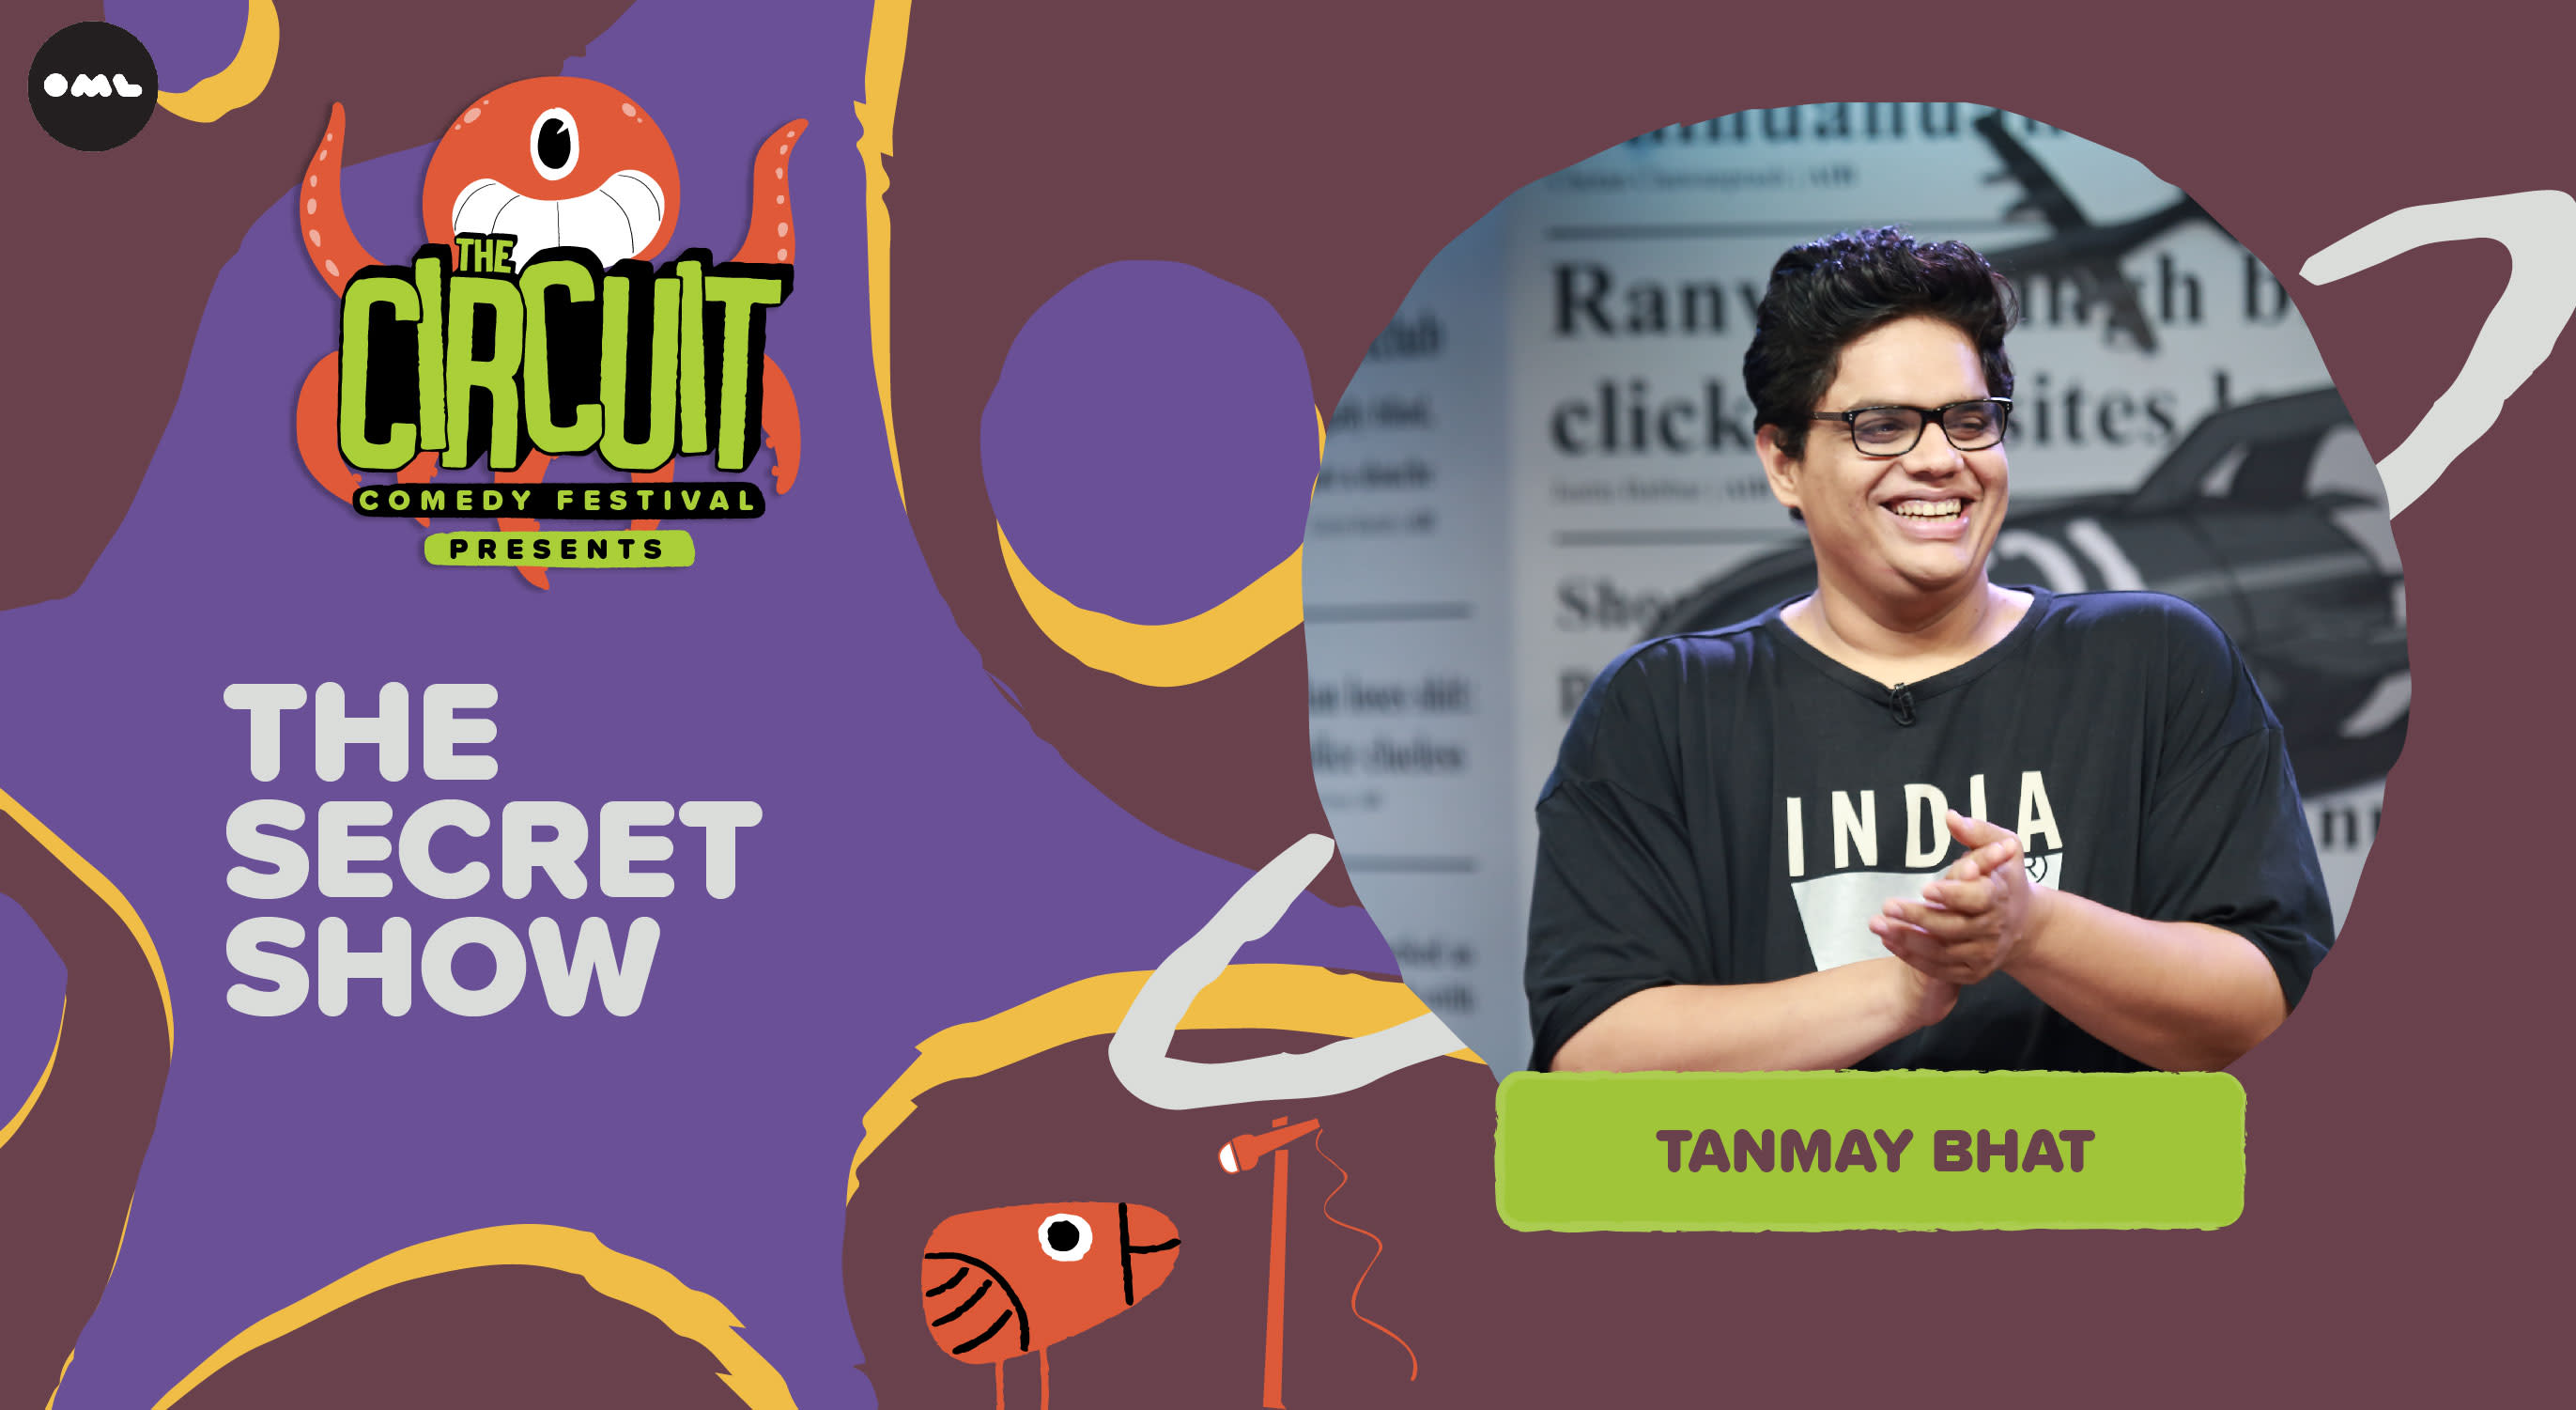 The Secret Show by Tanmay Bhat | The Circuit Comedy Festival, Bengaluru